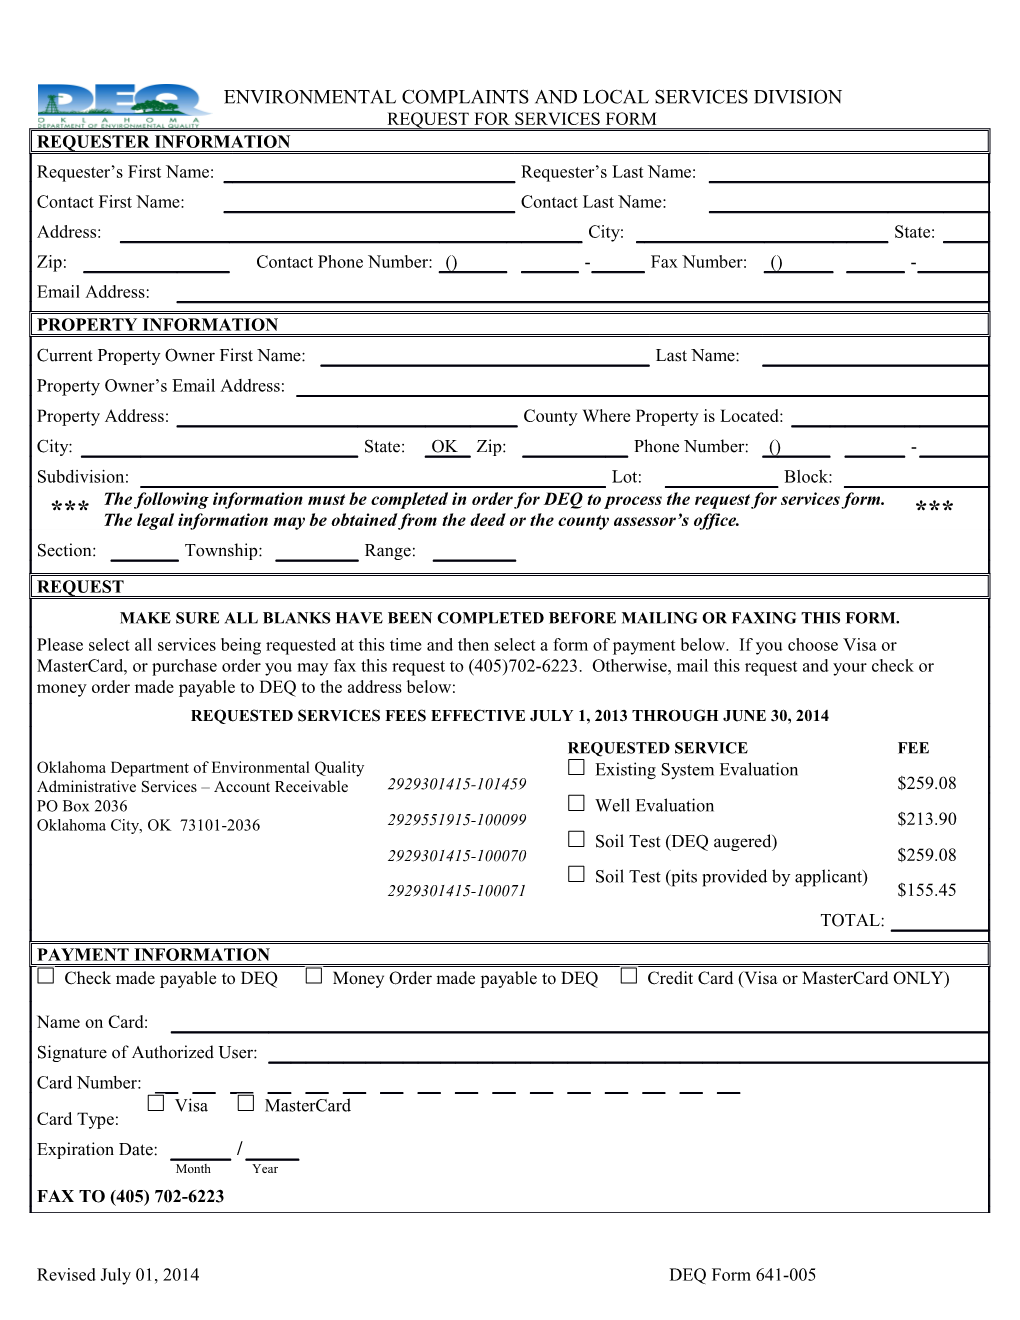 Request for Services Form